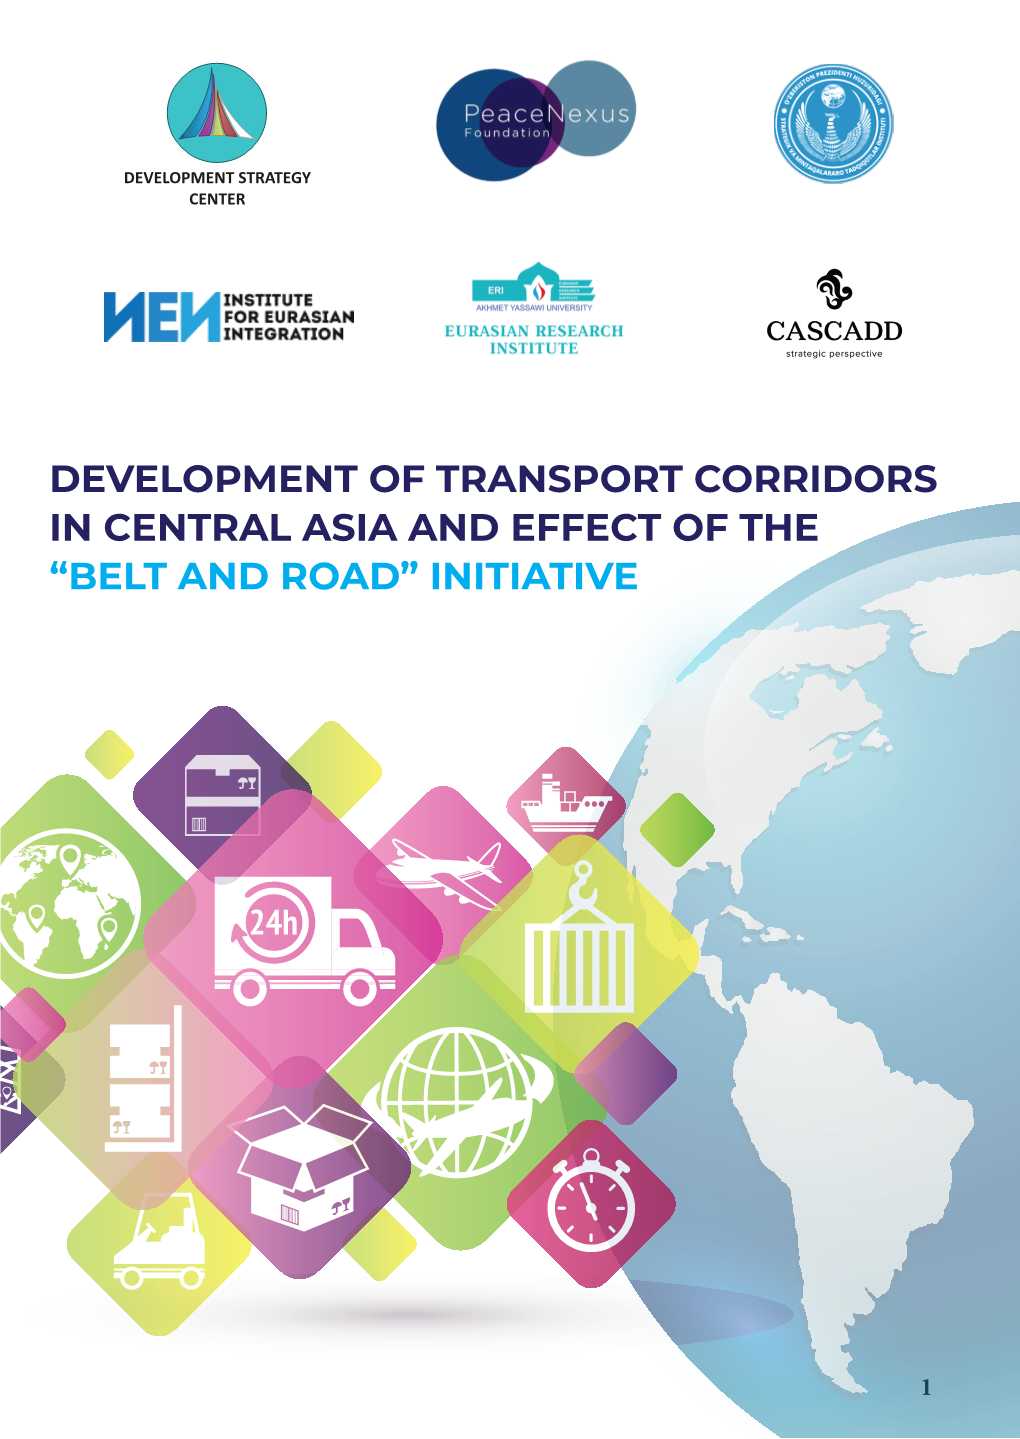 Development of Transport Corridors in Central Asia and Effect of the “Belt and Road” Initiative